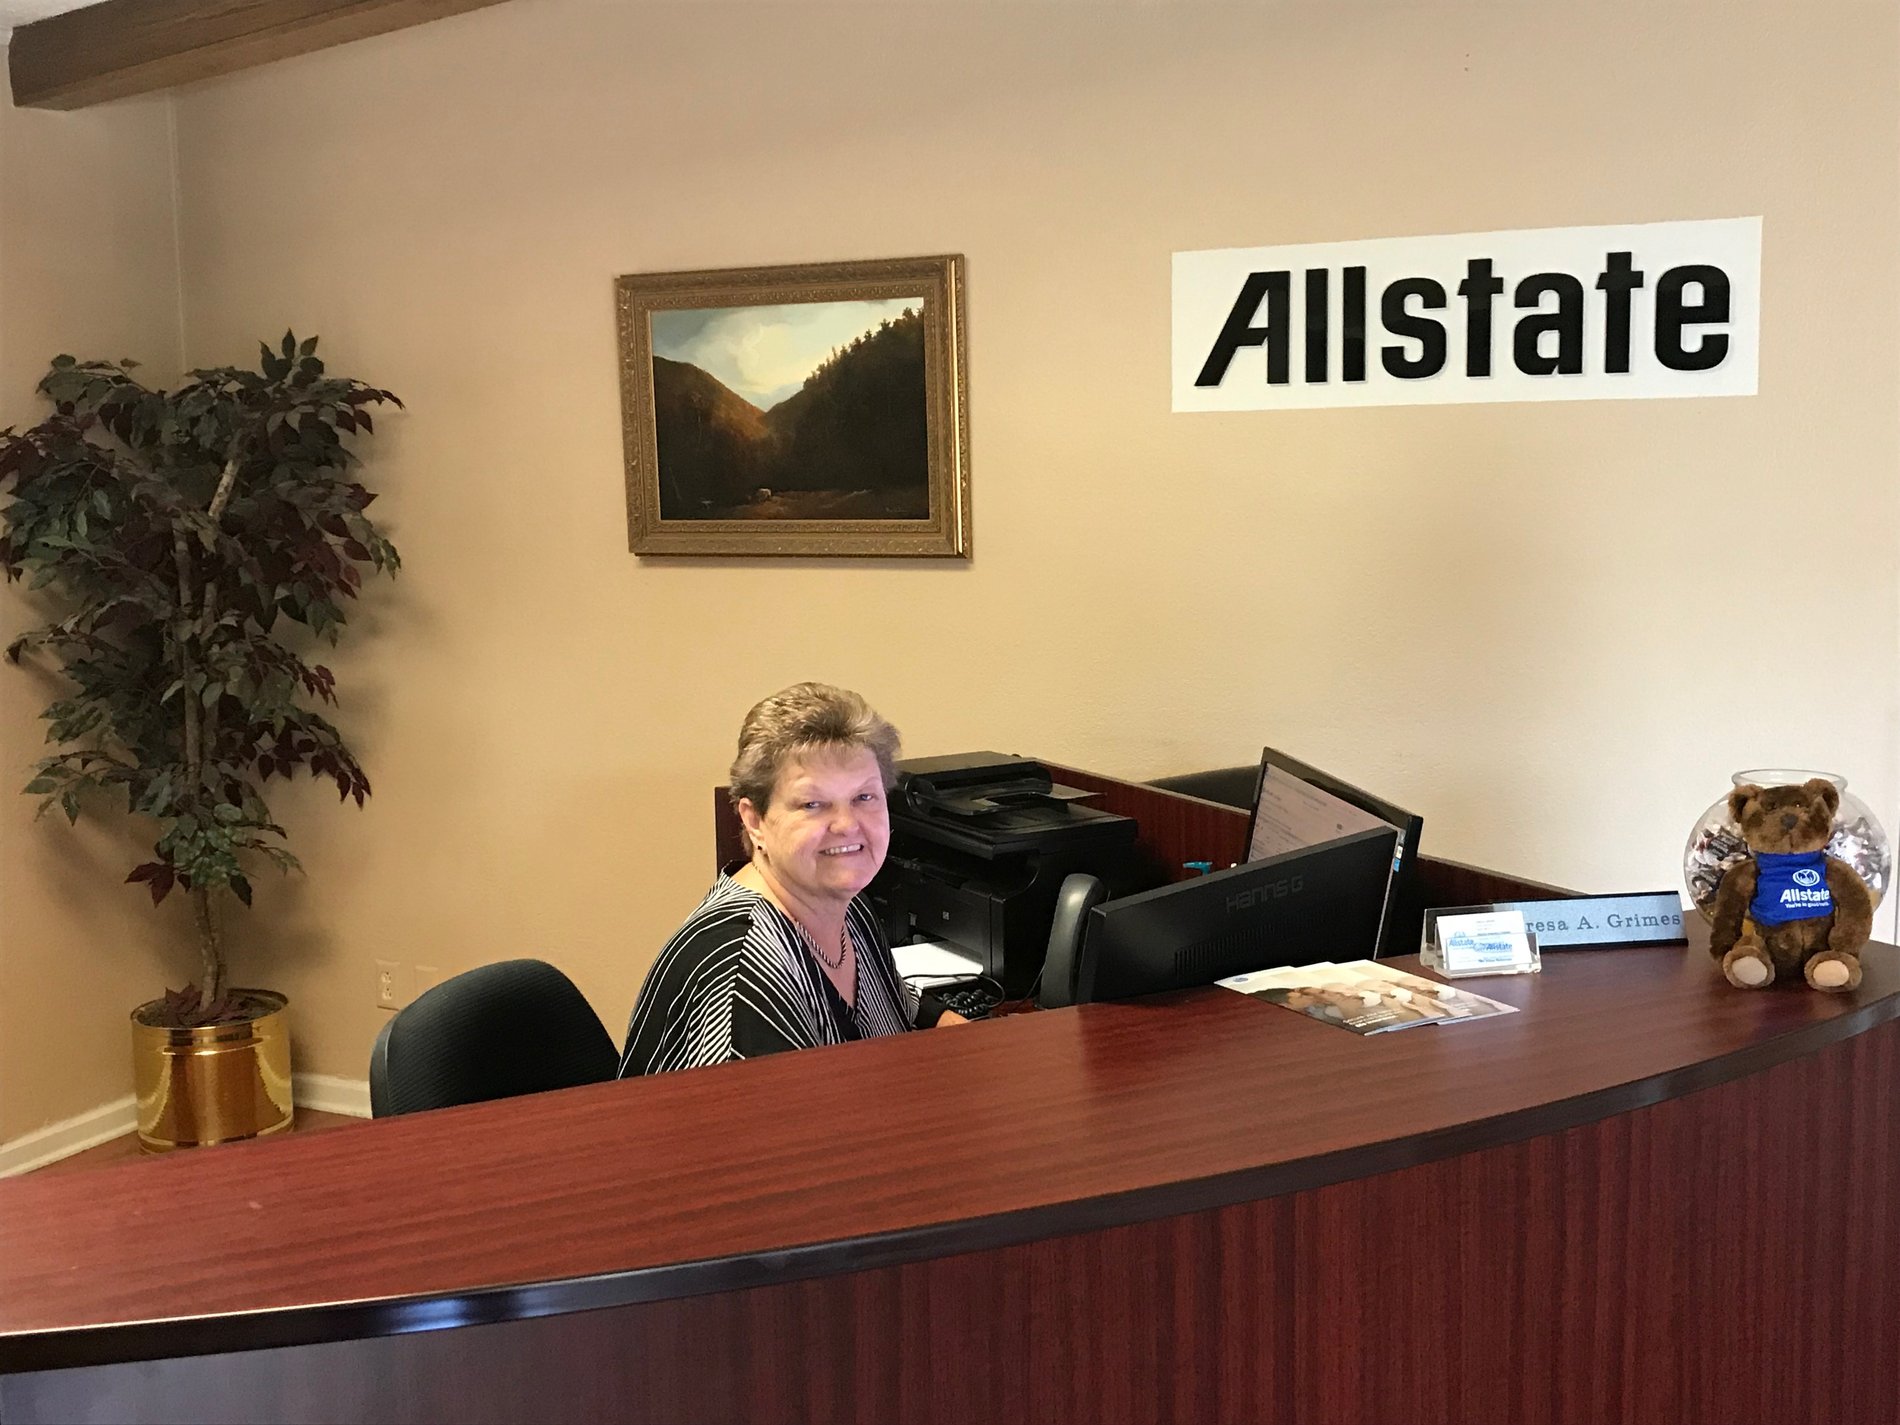 Robert Ford Allstate Insurance Agent in Knoxville, TN